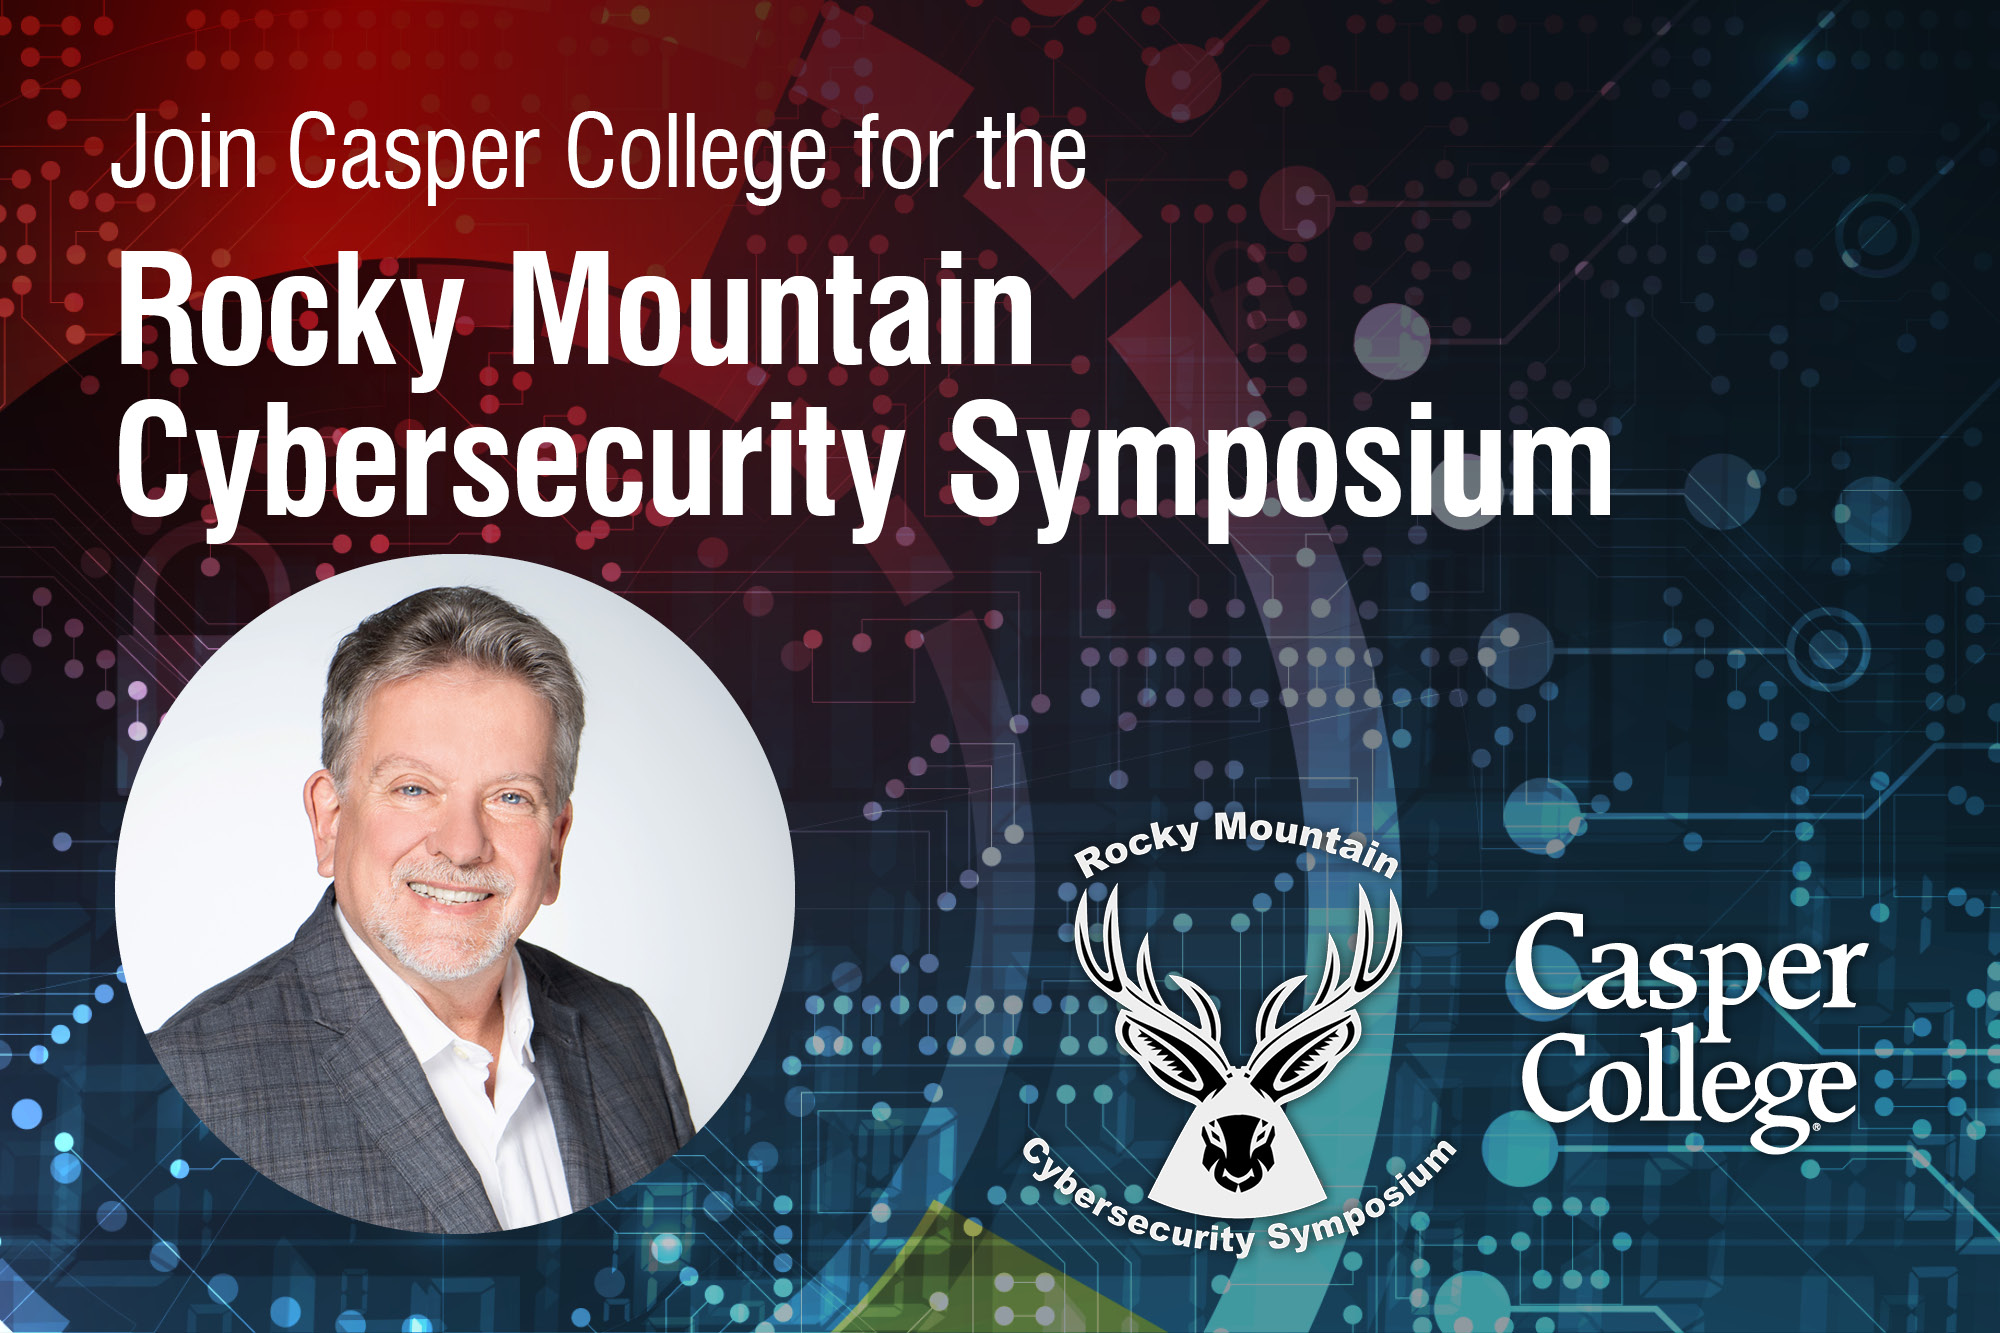 Image for press release on Peter Warmka at Cybersecurity Symposium.